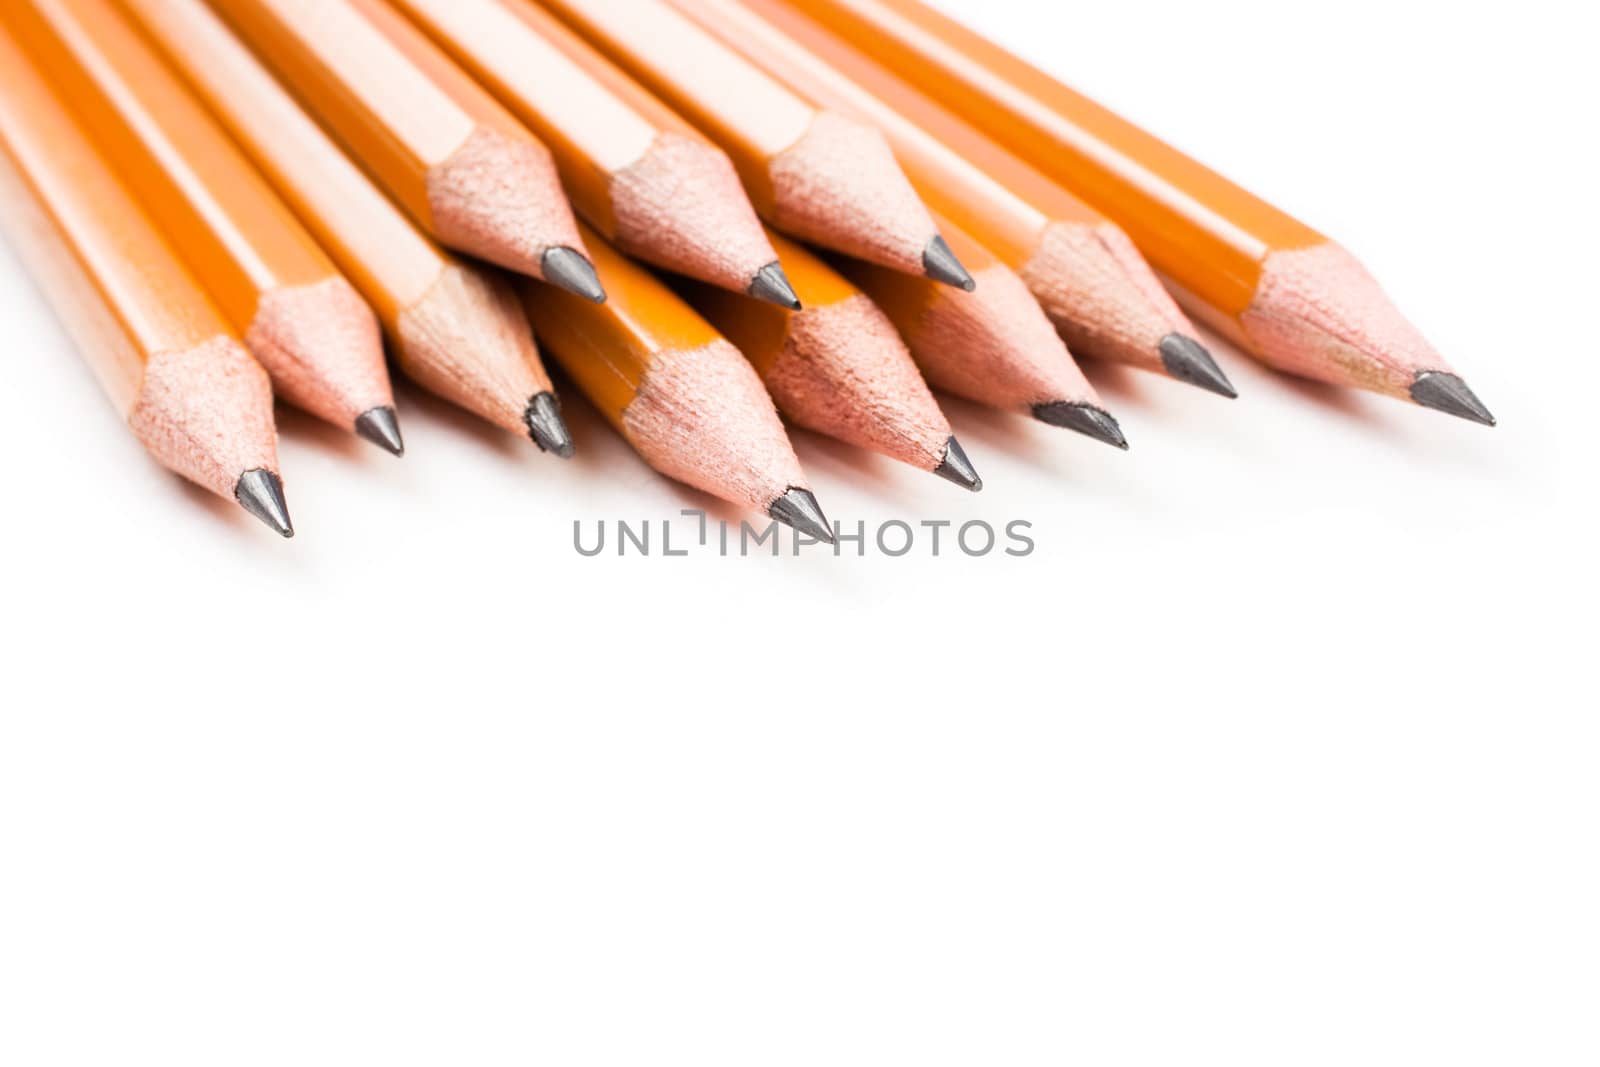 isoleted on white background, selective focus on nearest parts of pencils